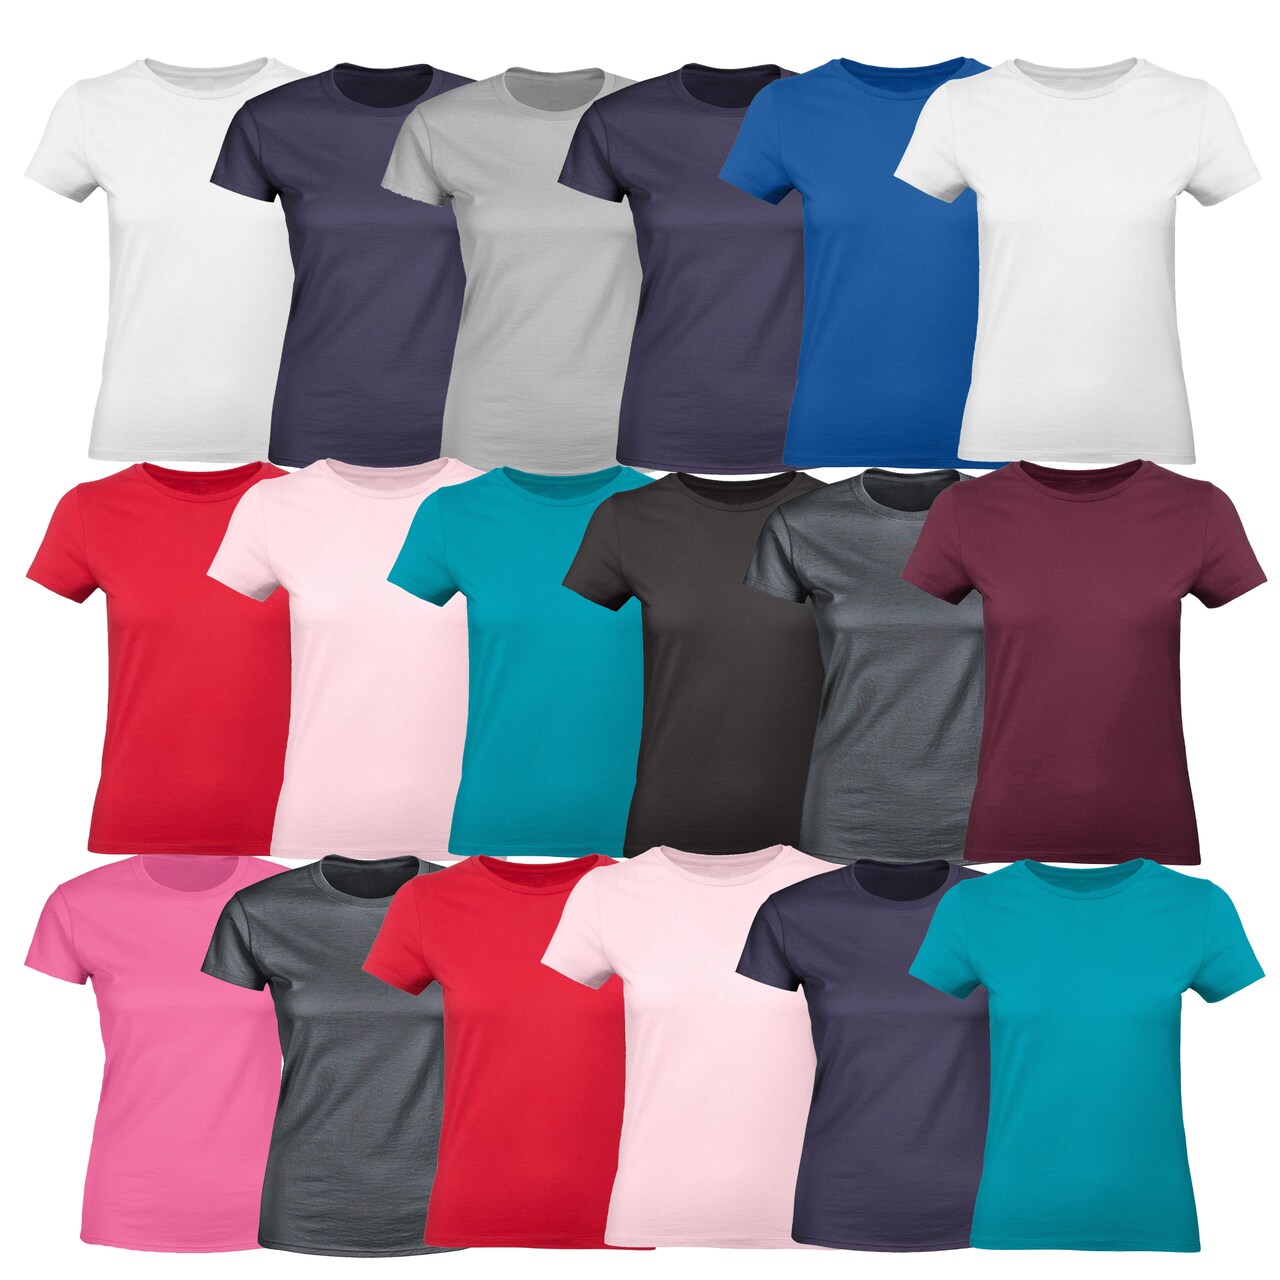 Summer Tees for Women - 100% Cotton Pack Size T-shirts | Perfect-fit, Casual women&#x27;s tees, Breathable cotton t-shirts, Cool summer apparel | Stay Cool with Our Summer Cotton Women&#x27;s T-shirts | Soft, Stylish &#x26; Comfortable | RADYAN